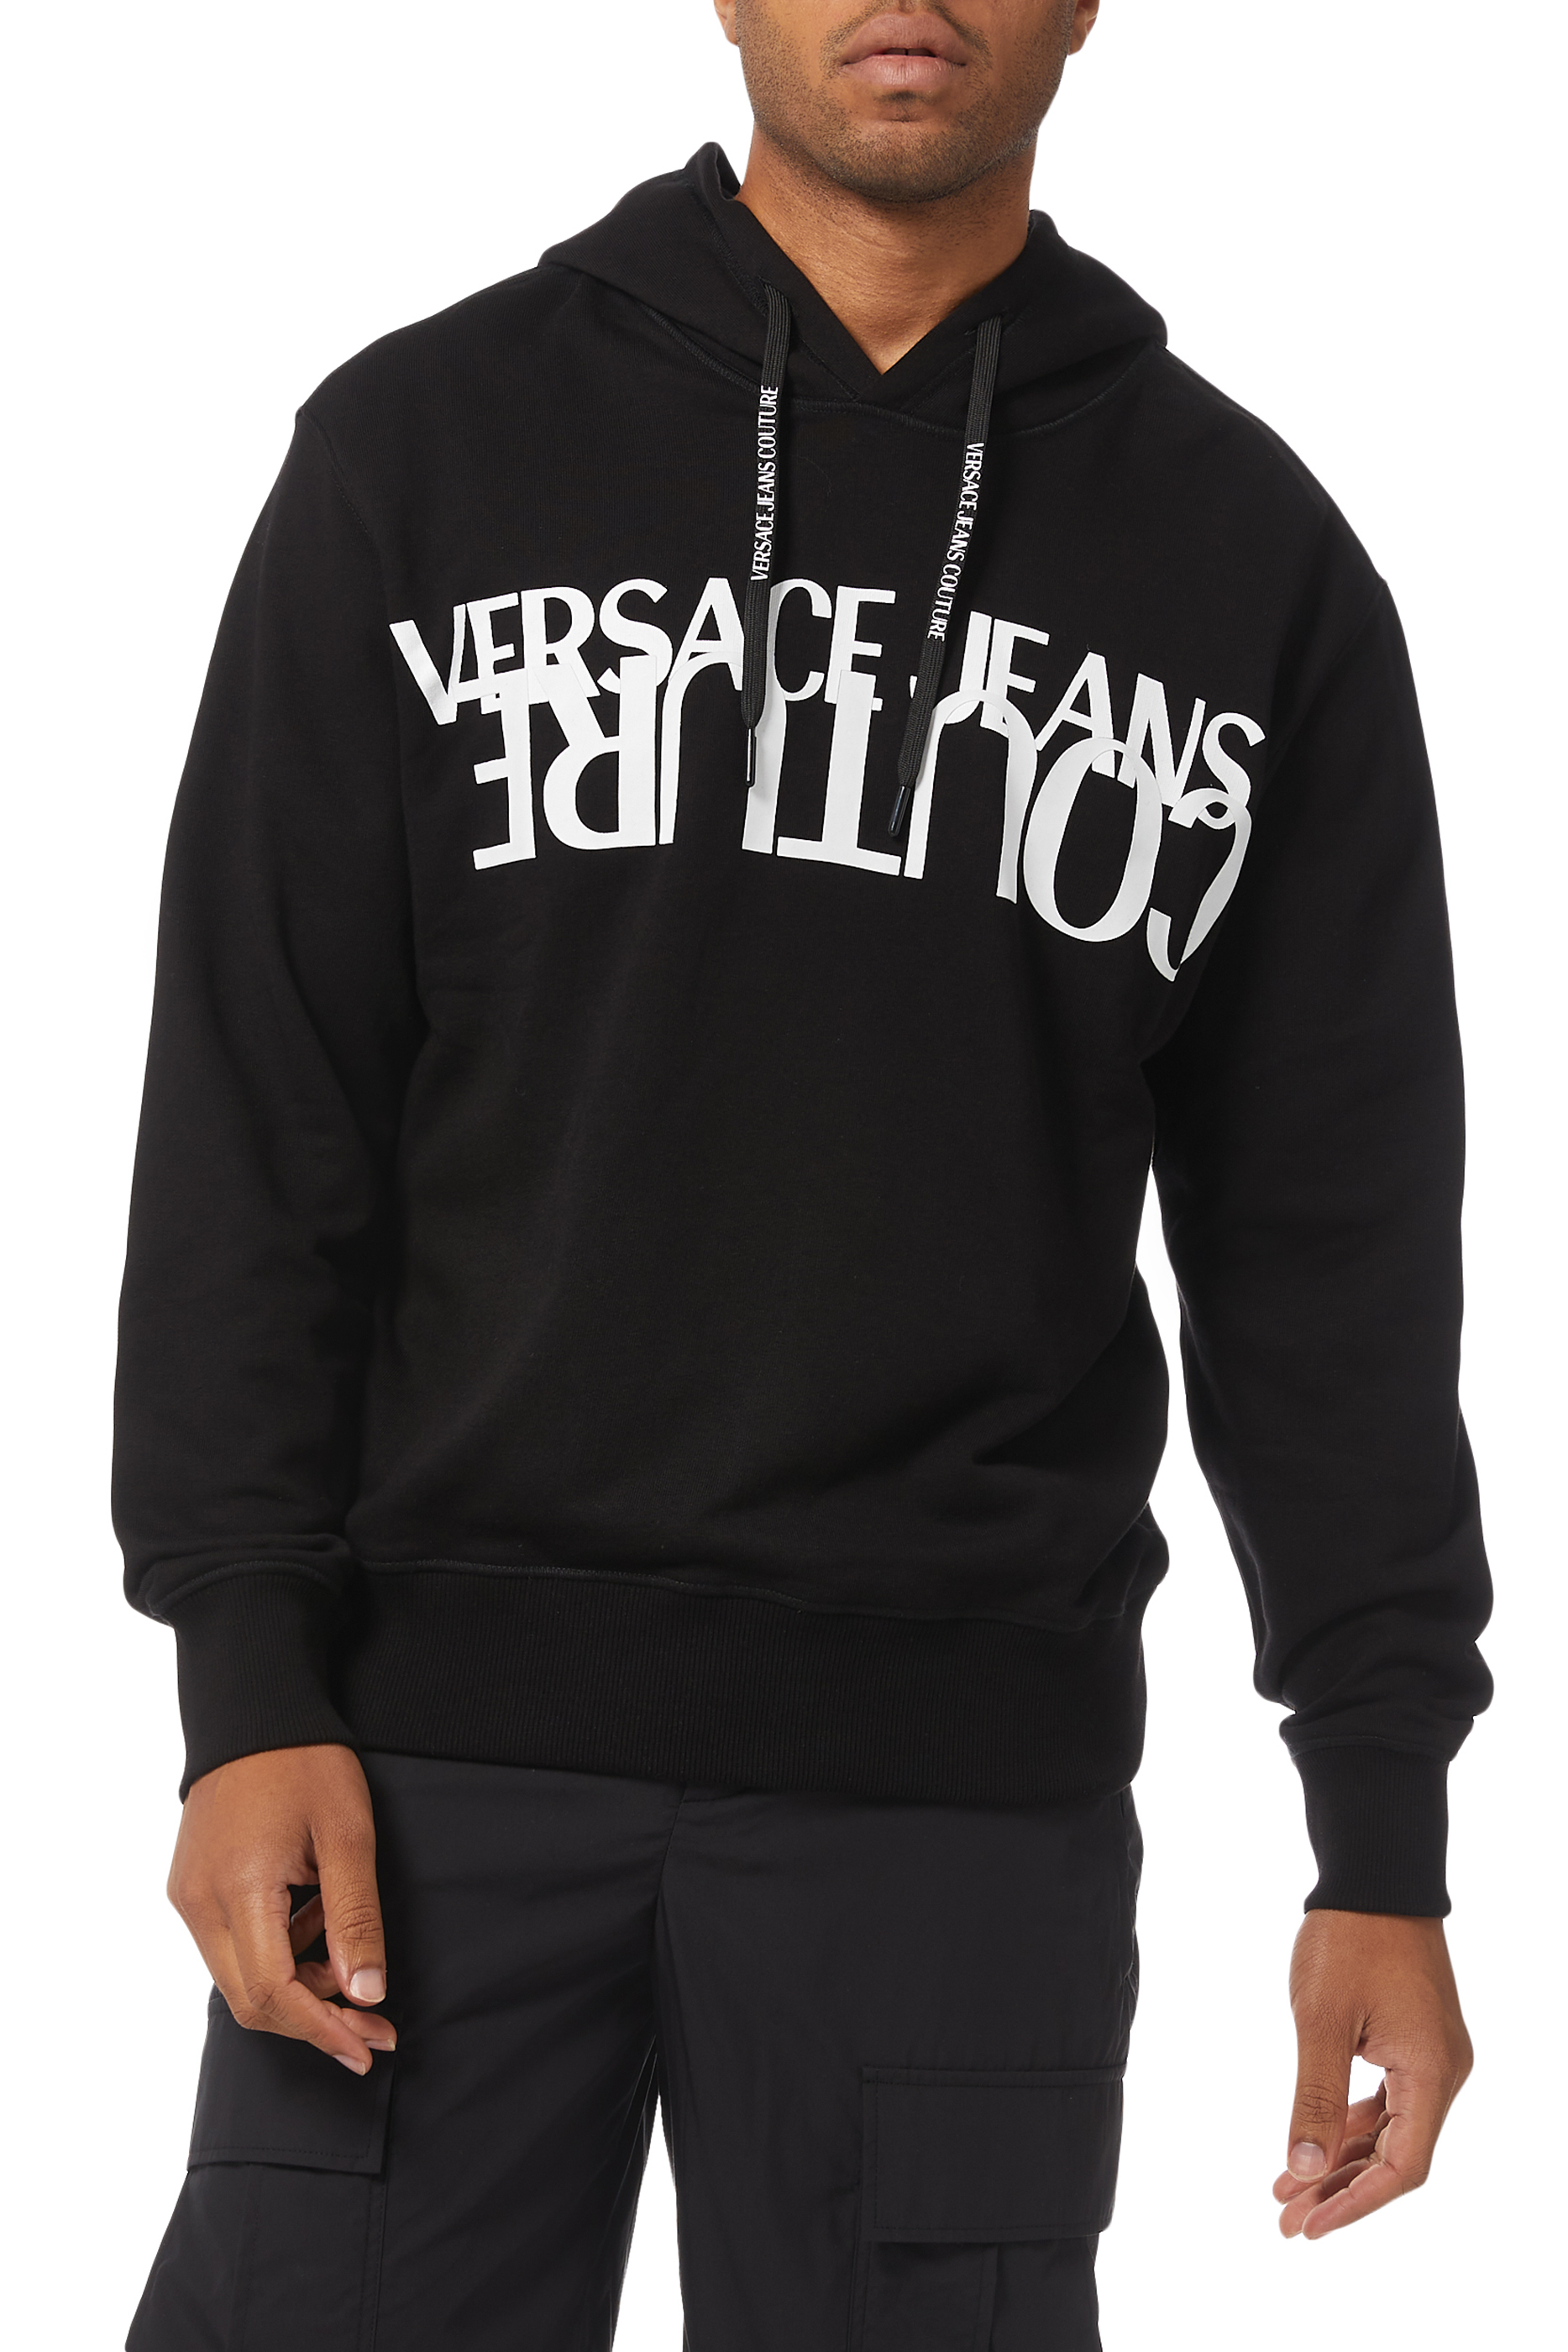 Buy VERSACE JEANS Reflection Logo Print Hoodie - Mens for SAR 500.00